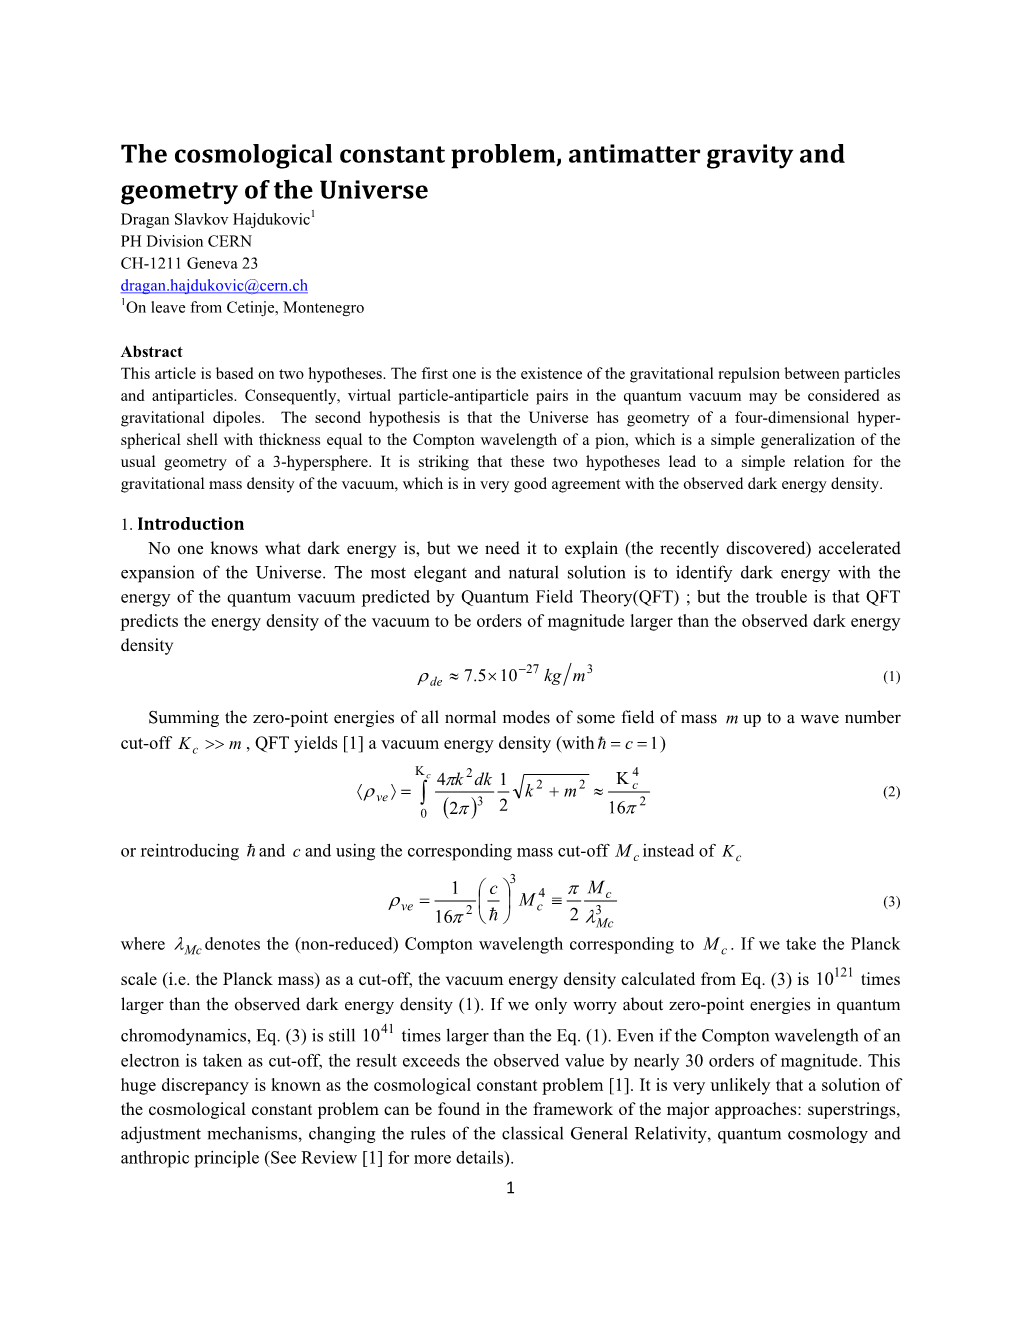 The Cosmological Constant Problem, Antimatter Gravity and Geometry of the Universe